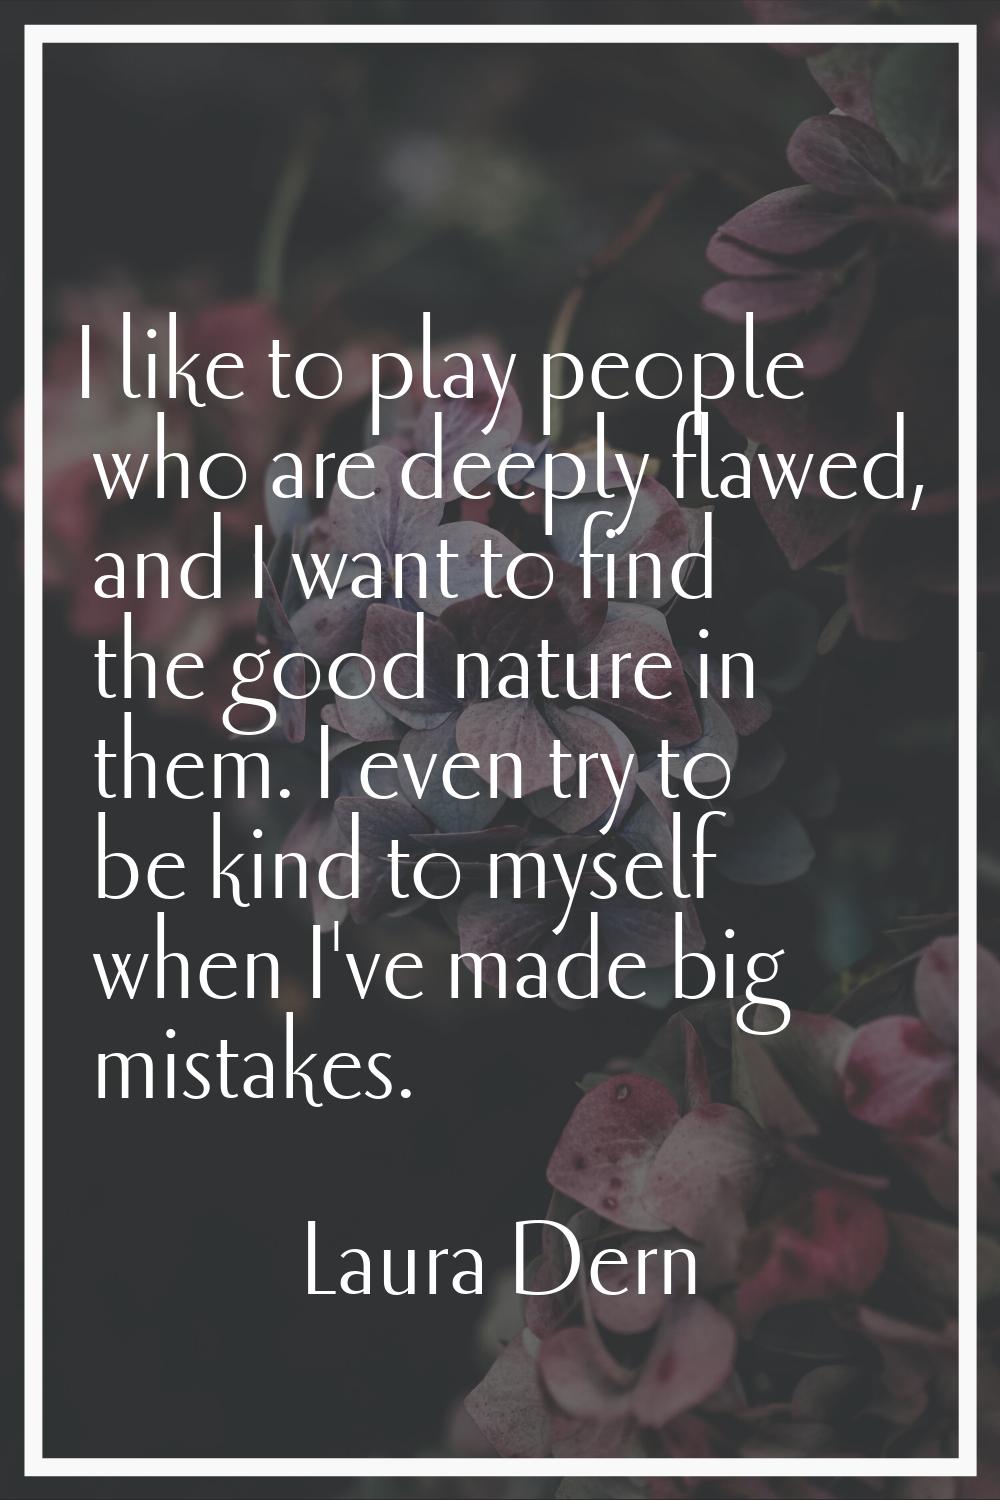 I like to play people who are deeply flawed, and I want to find the good nature in them. I even try